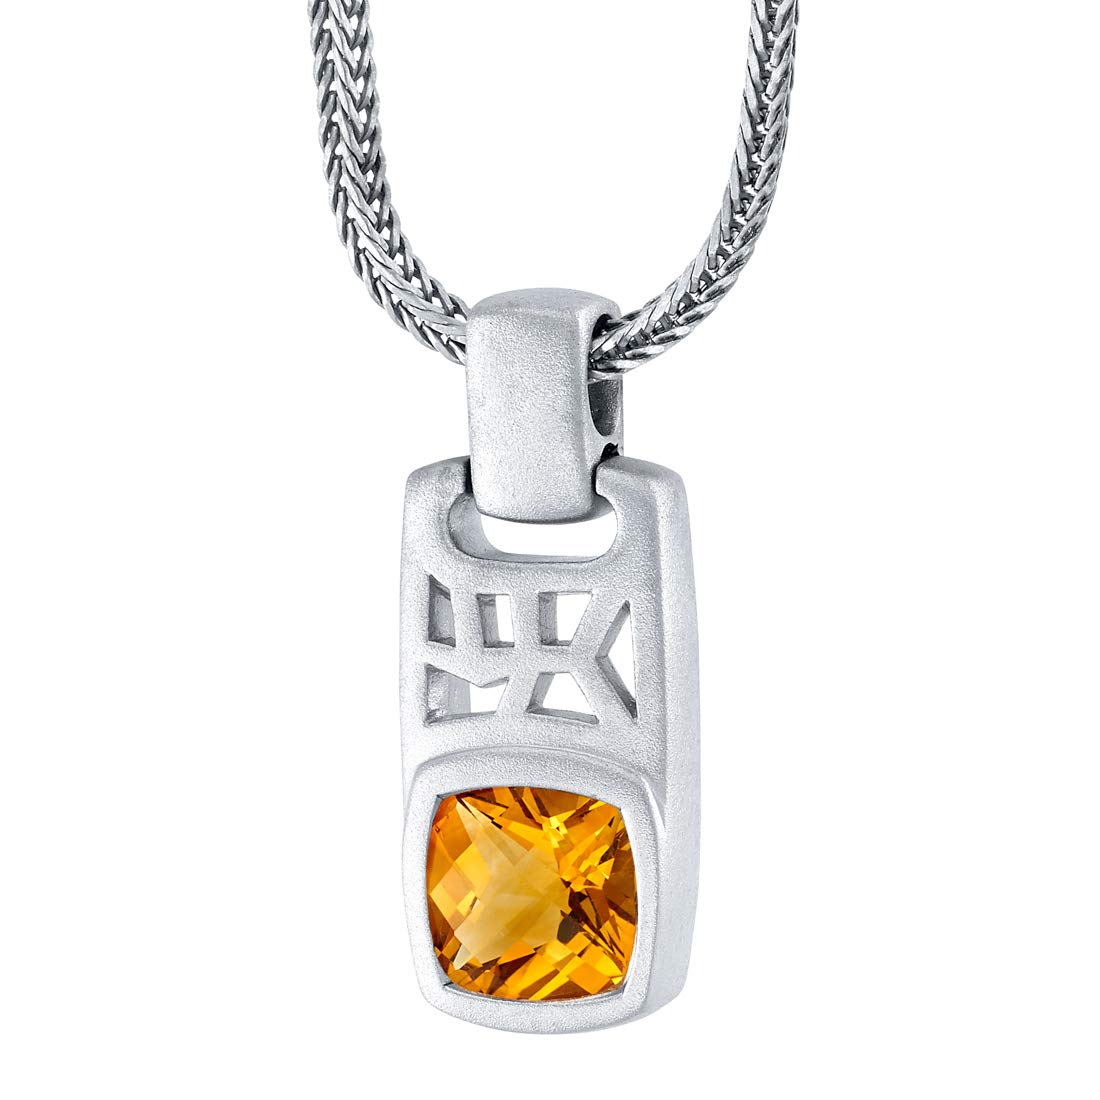 Peora Citrine Tag Pendant Necklace for Men in Sterling Silver, 2.75 Carats Cushion Cut, Brushed Finished, with 22-Inch Italian Chain